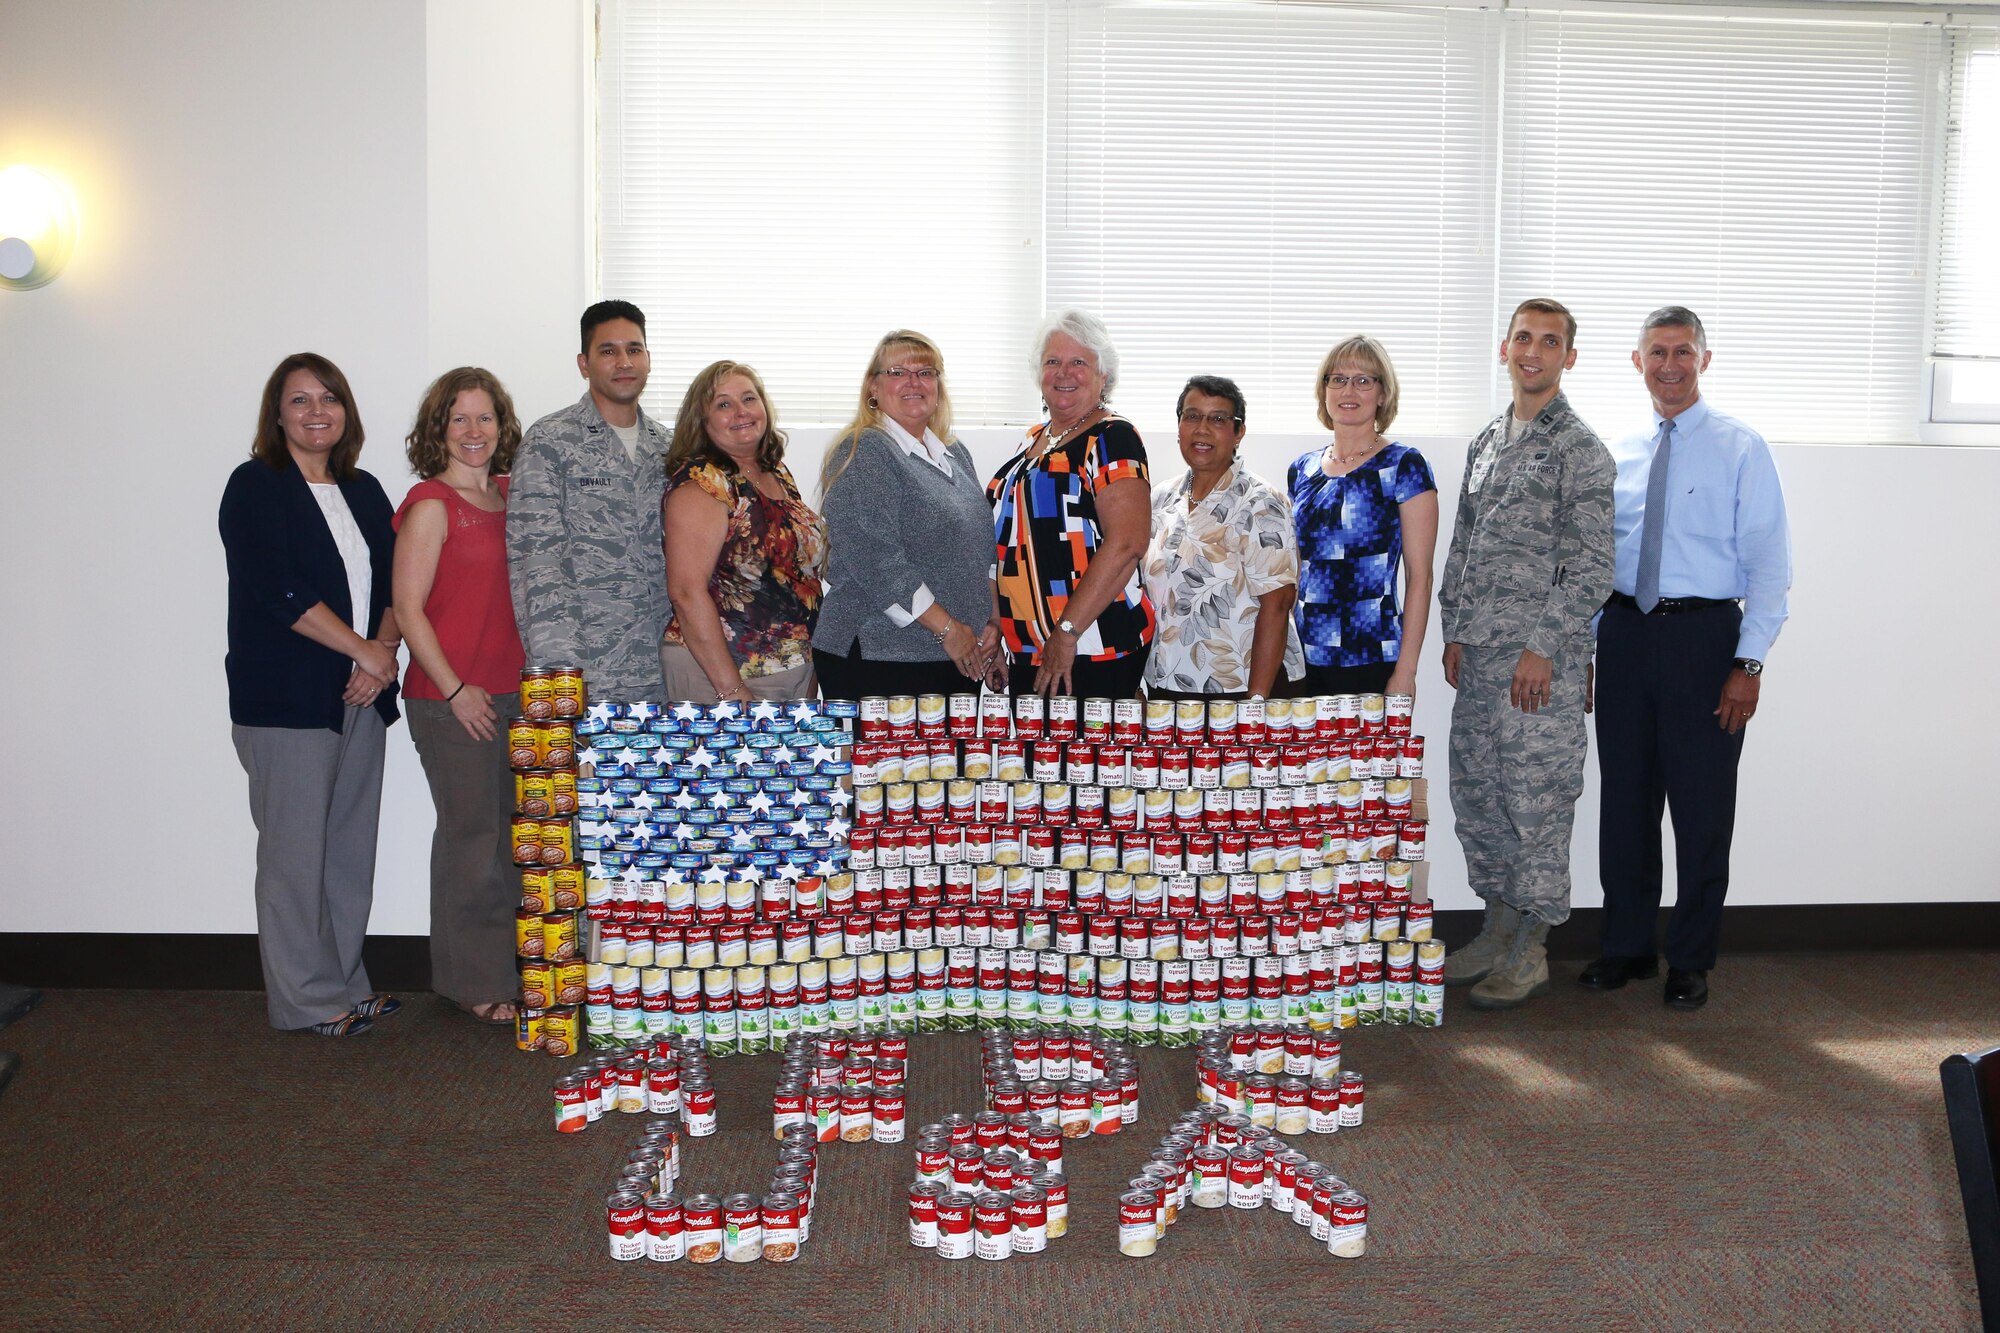 Feds Feed Families volunteers at AEDC stand with the “Can-Struction” display made from canned food donations to resemble the American flag, Aug. 31, 2016. The donations, totaling 1,579 pounds, were given to three local Good Samaritan agencies. Pictured left to right are Lalonnie Saltzman, Shannon Allen, Capt. Michael Davault, Peggy Proffitt, Pamela Anderson, Judy Mohler, Josie Henley, Becky Morris, Capt. Jonathan Diaz and Kenneth Jacobsen. (U.S. Air Force photo/Holly Peterson) 